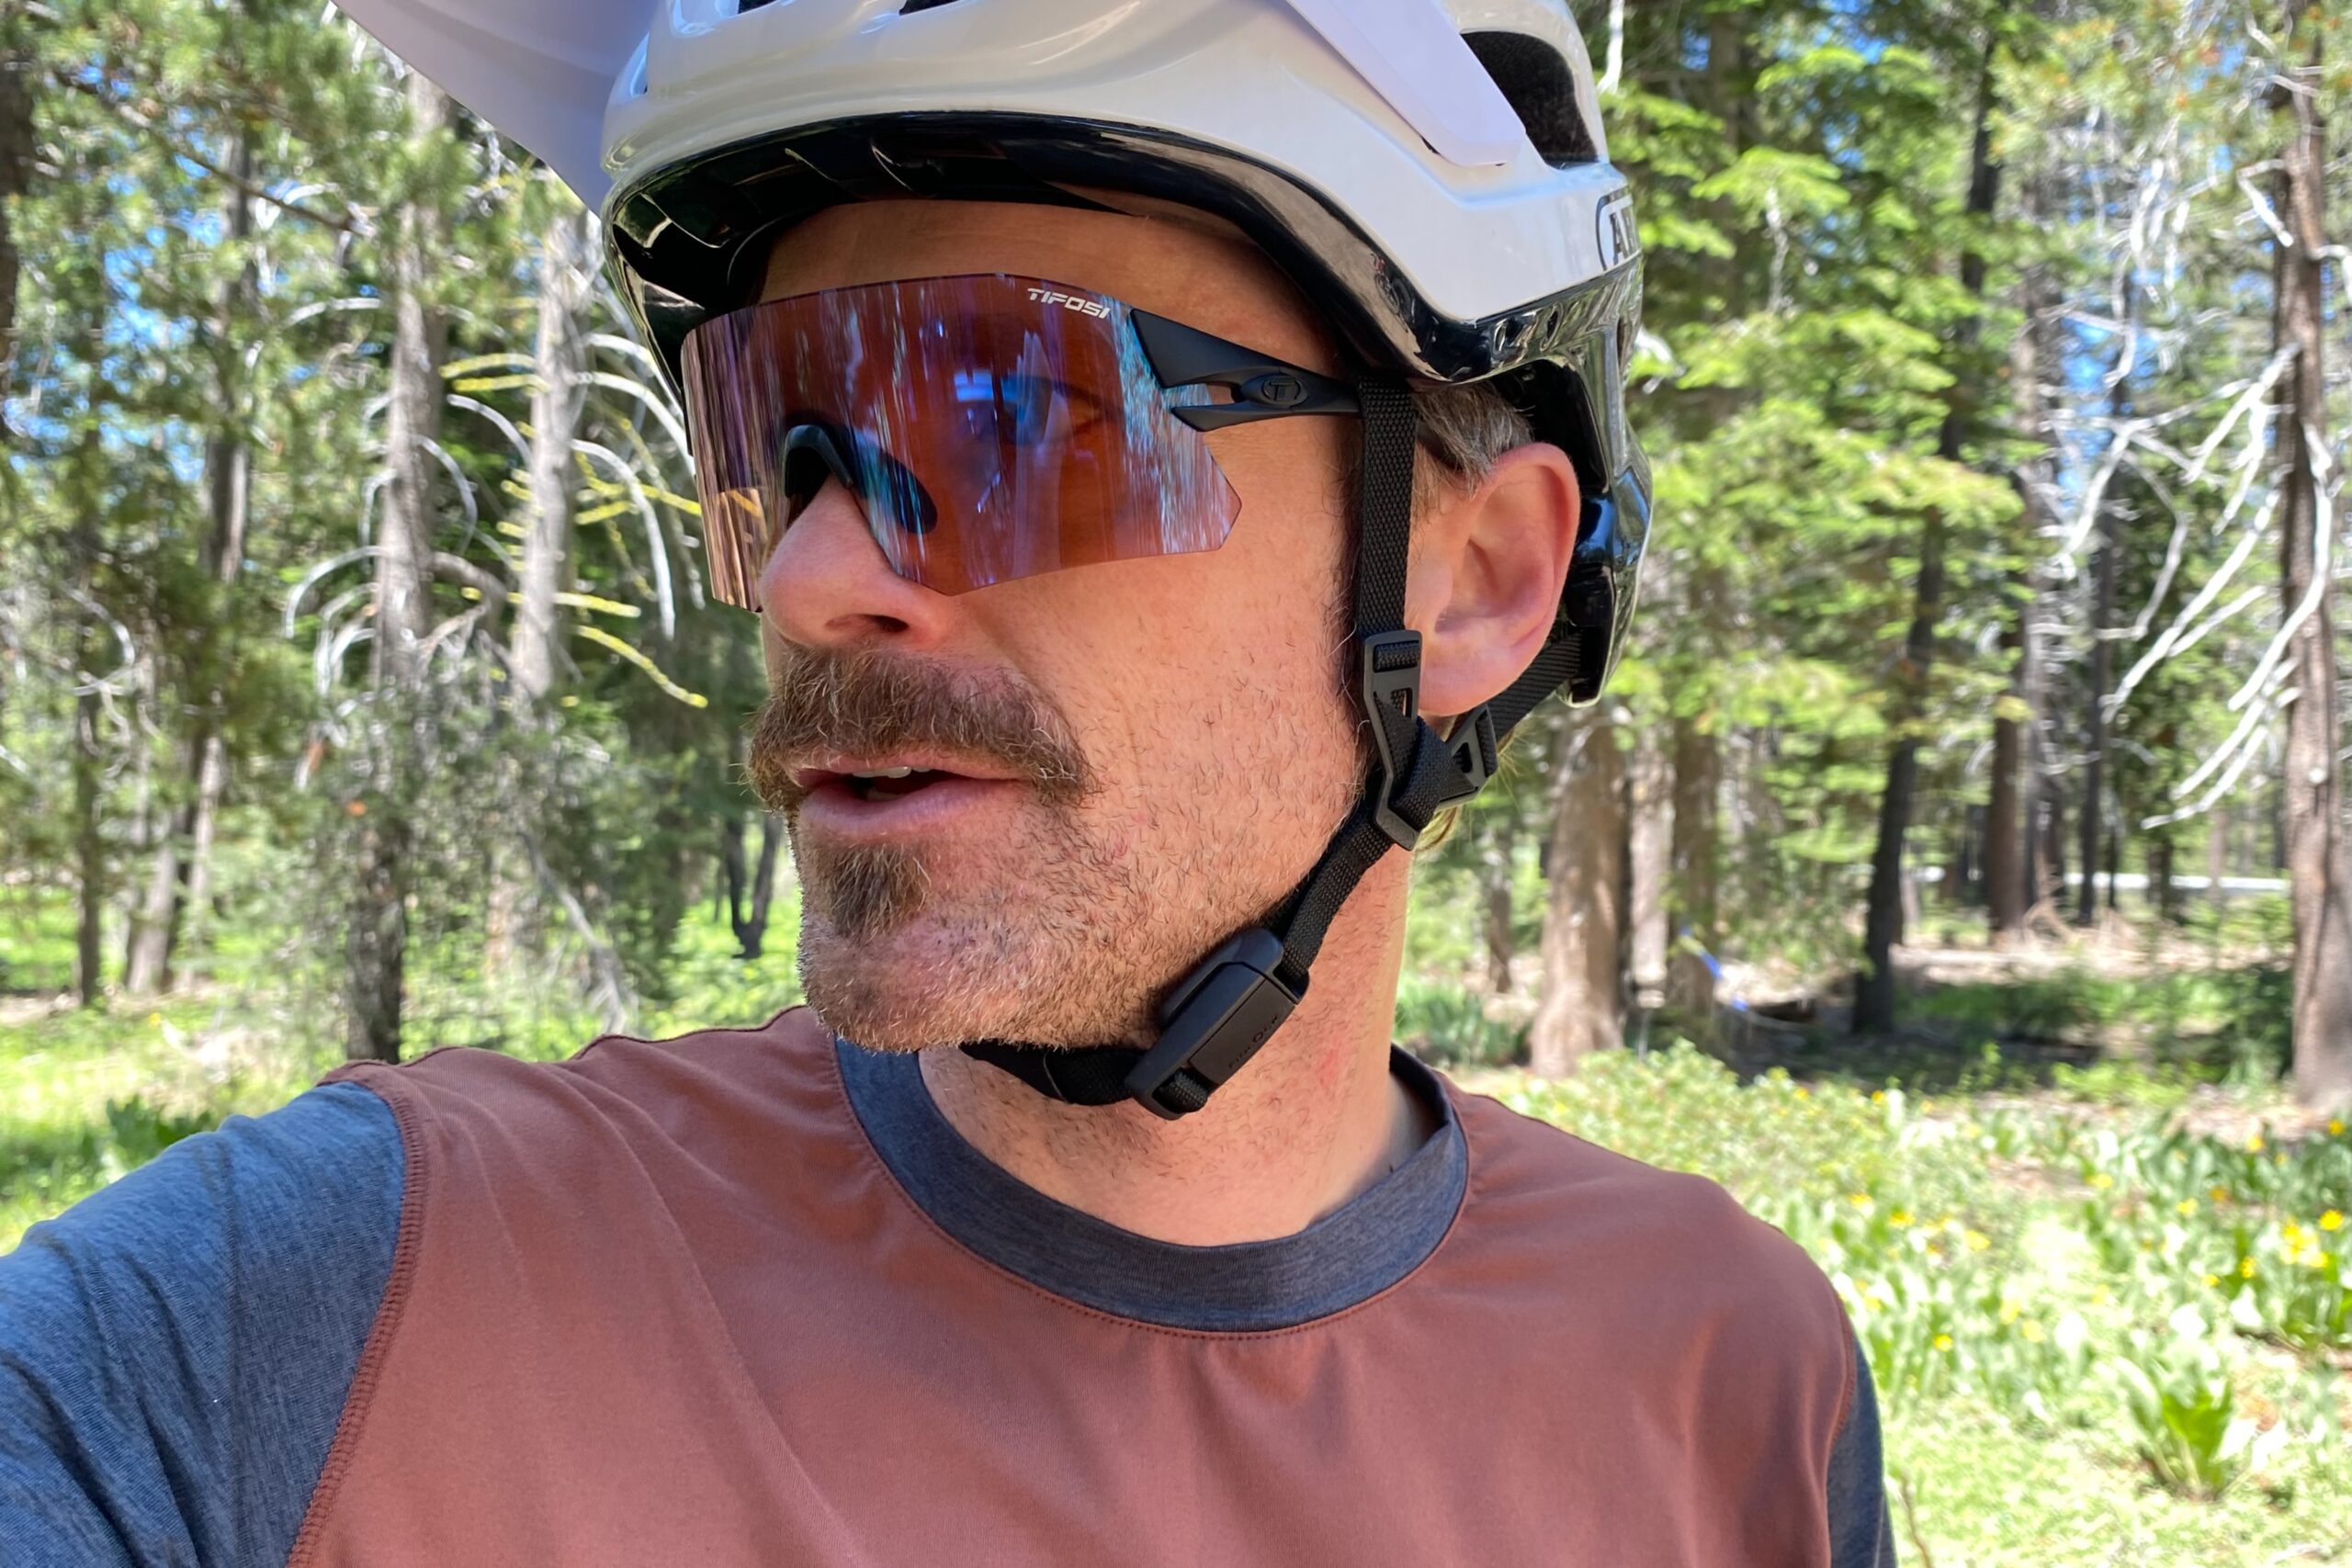 Tifosi Rail cycling sunglasses on the face